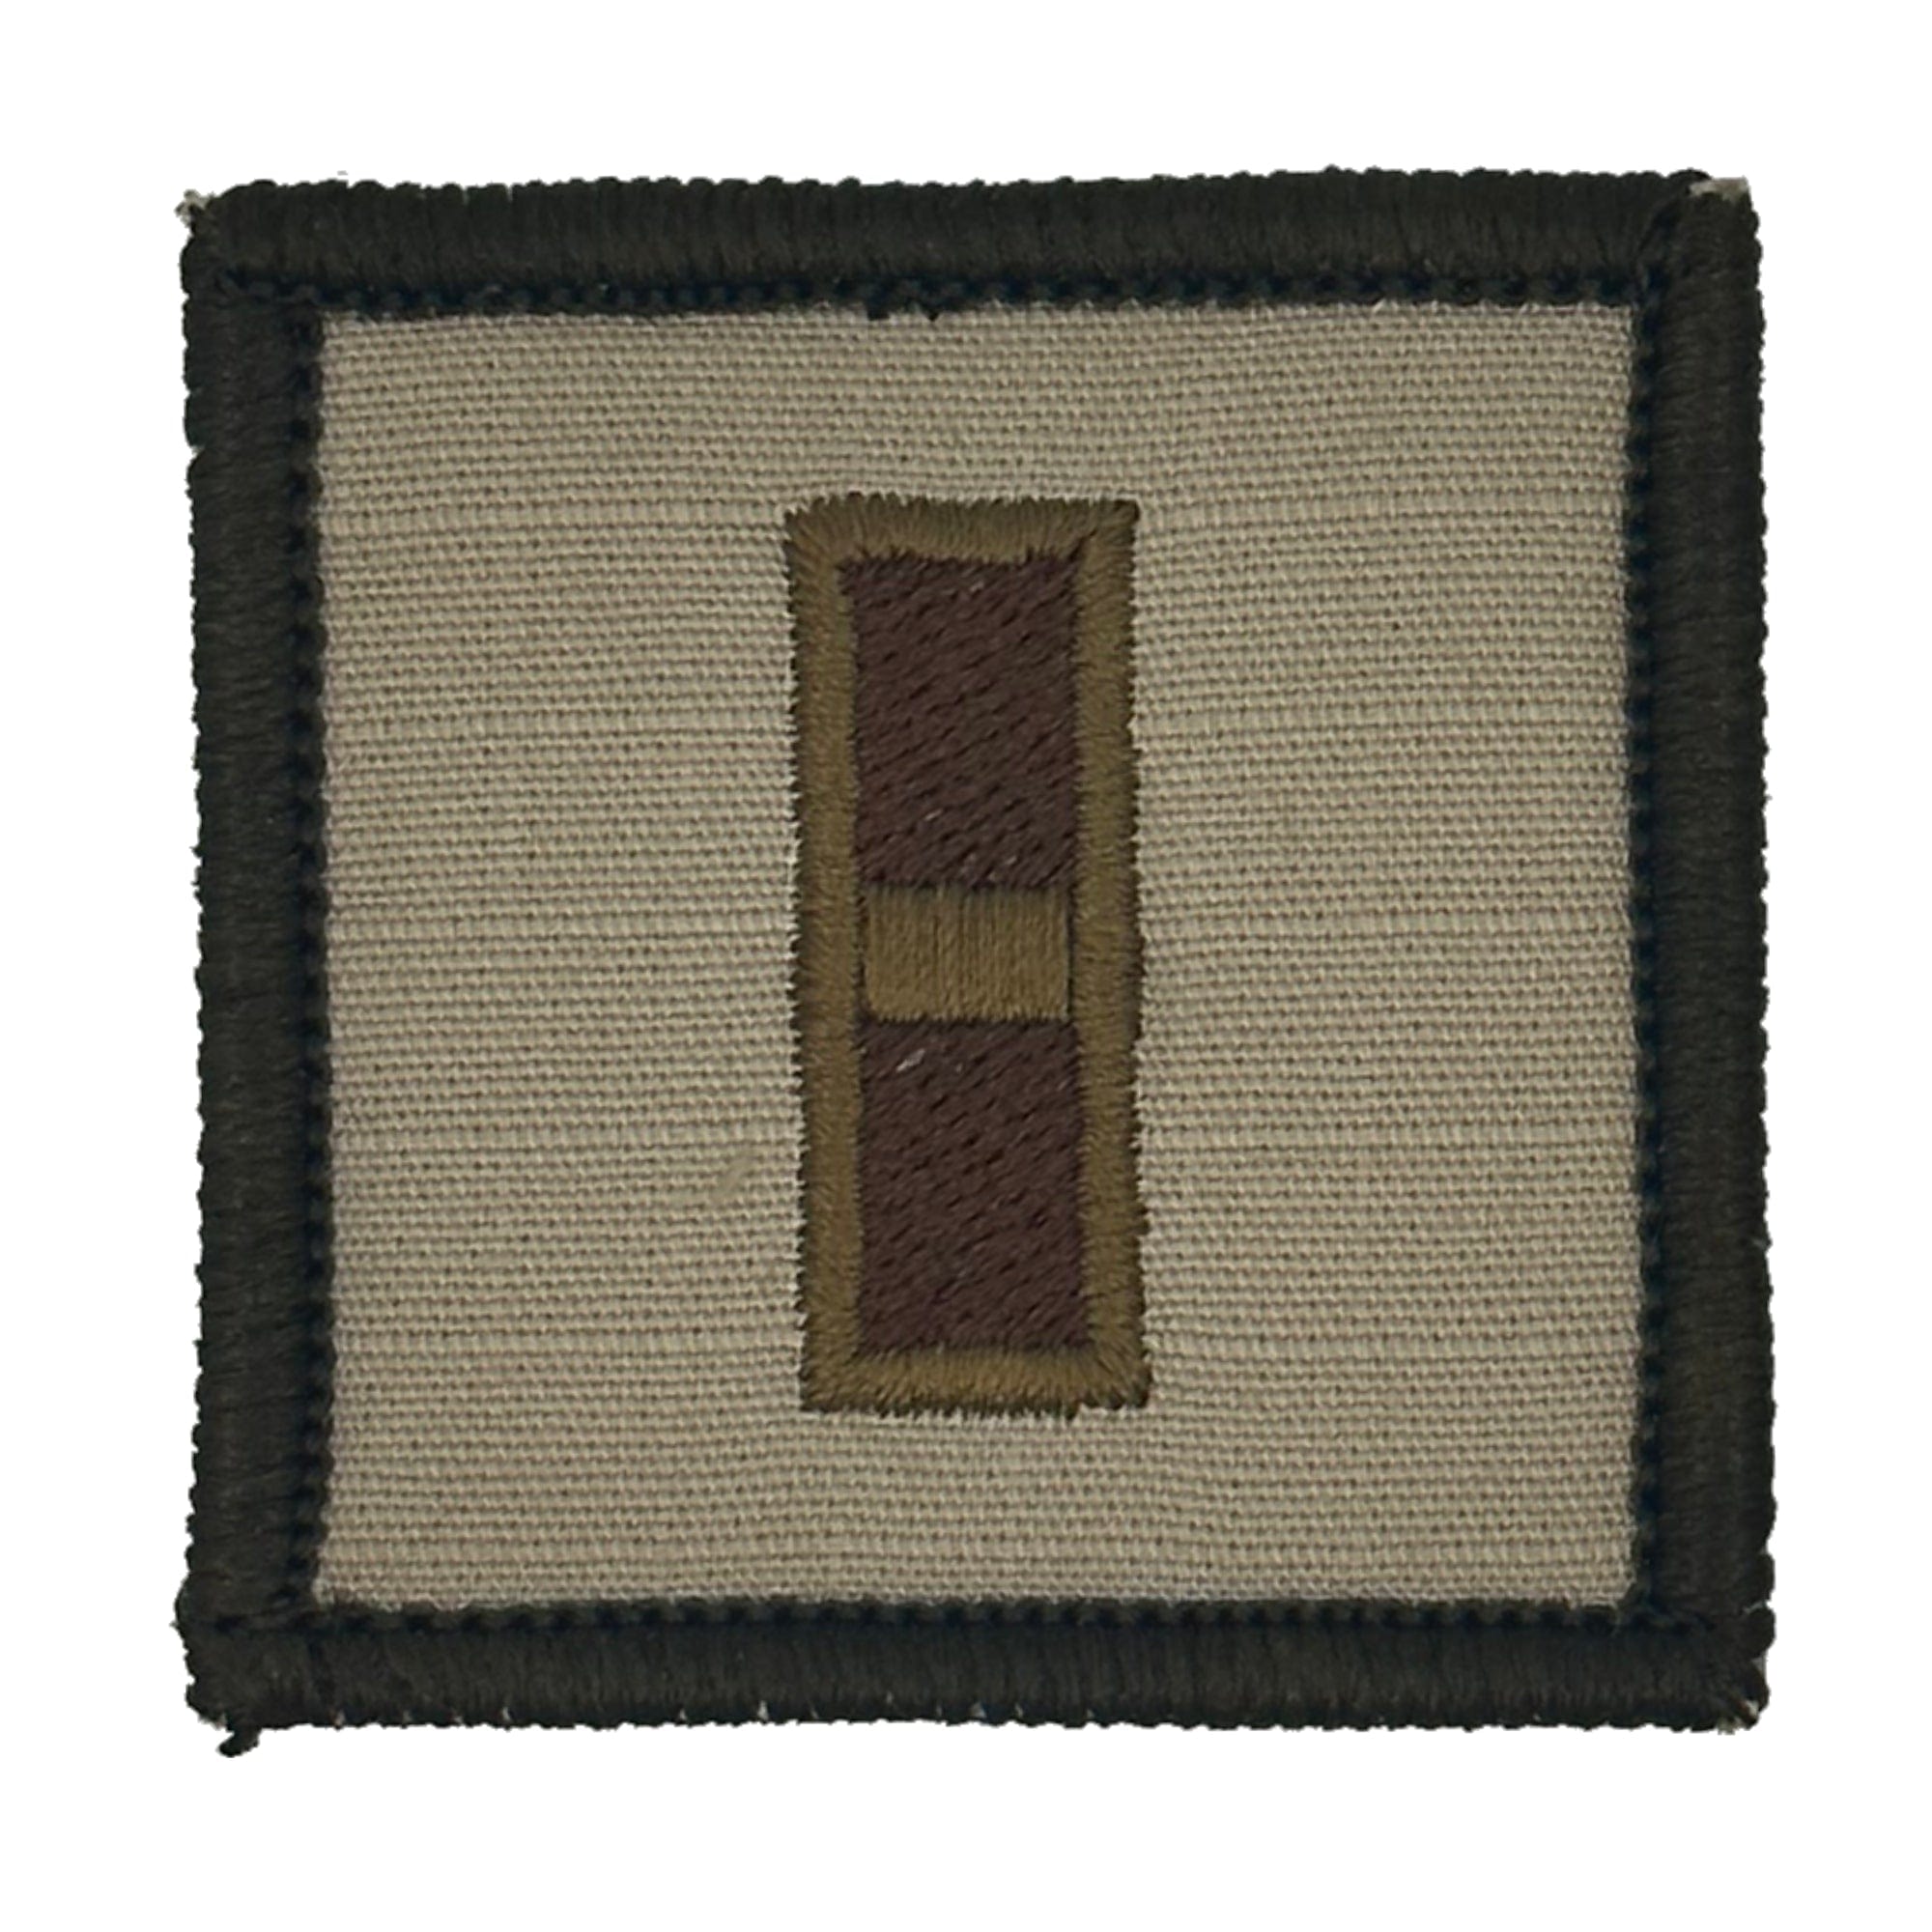 Tactical Gear Junkie Patches Desert Sand / Warrant Officer USMC Rank Insignia - 2x2 Patch